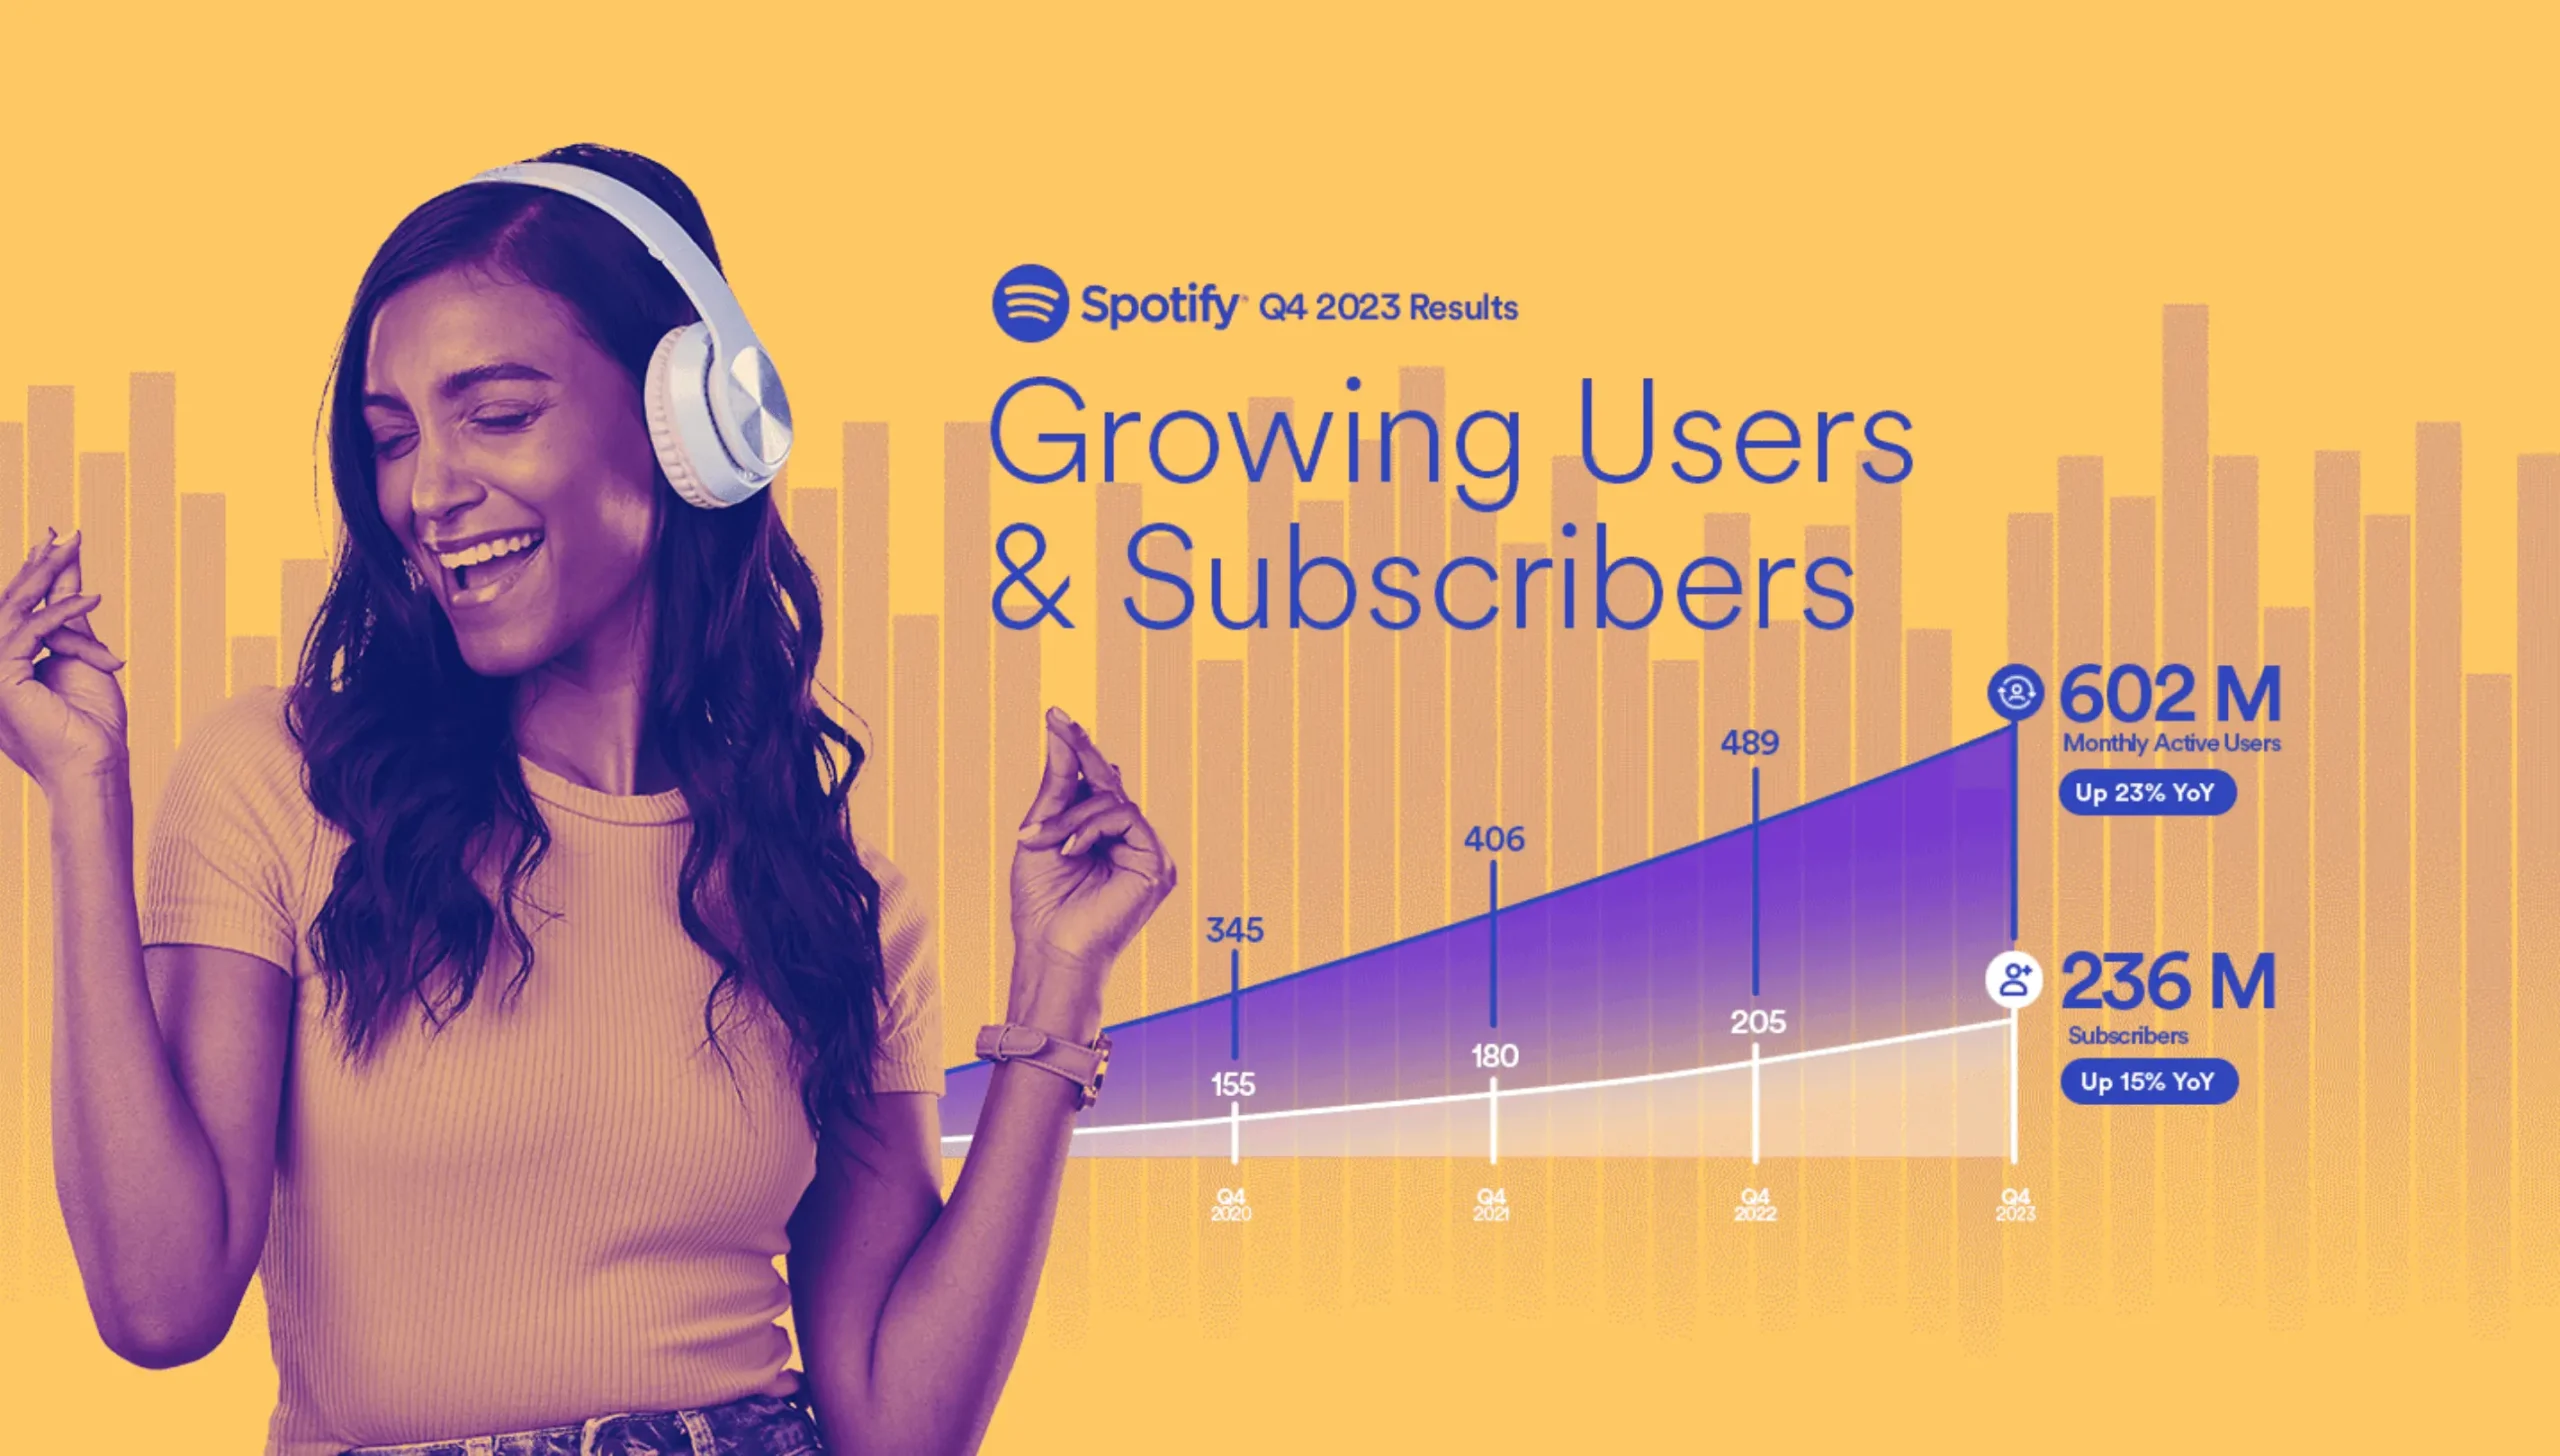 Spotify has reached 236 million premium subscribers